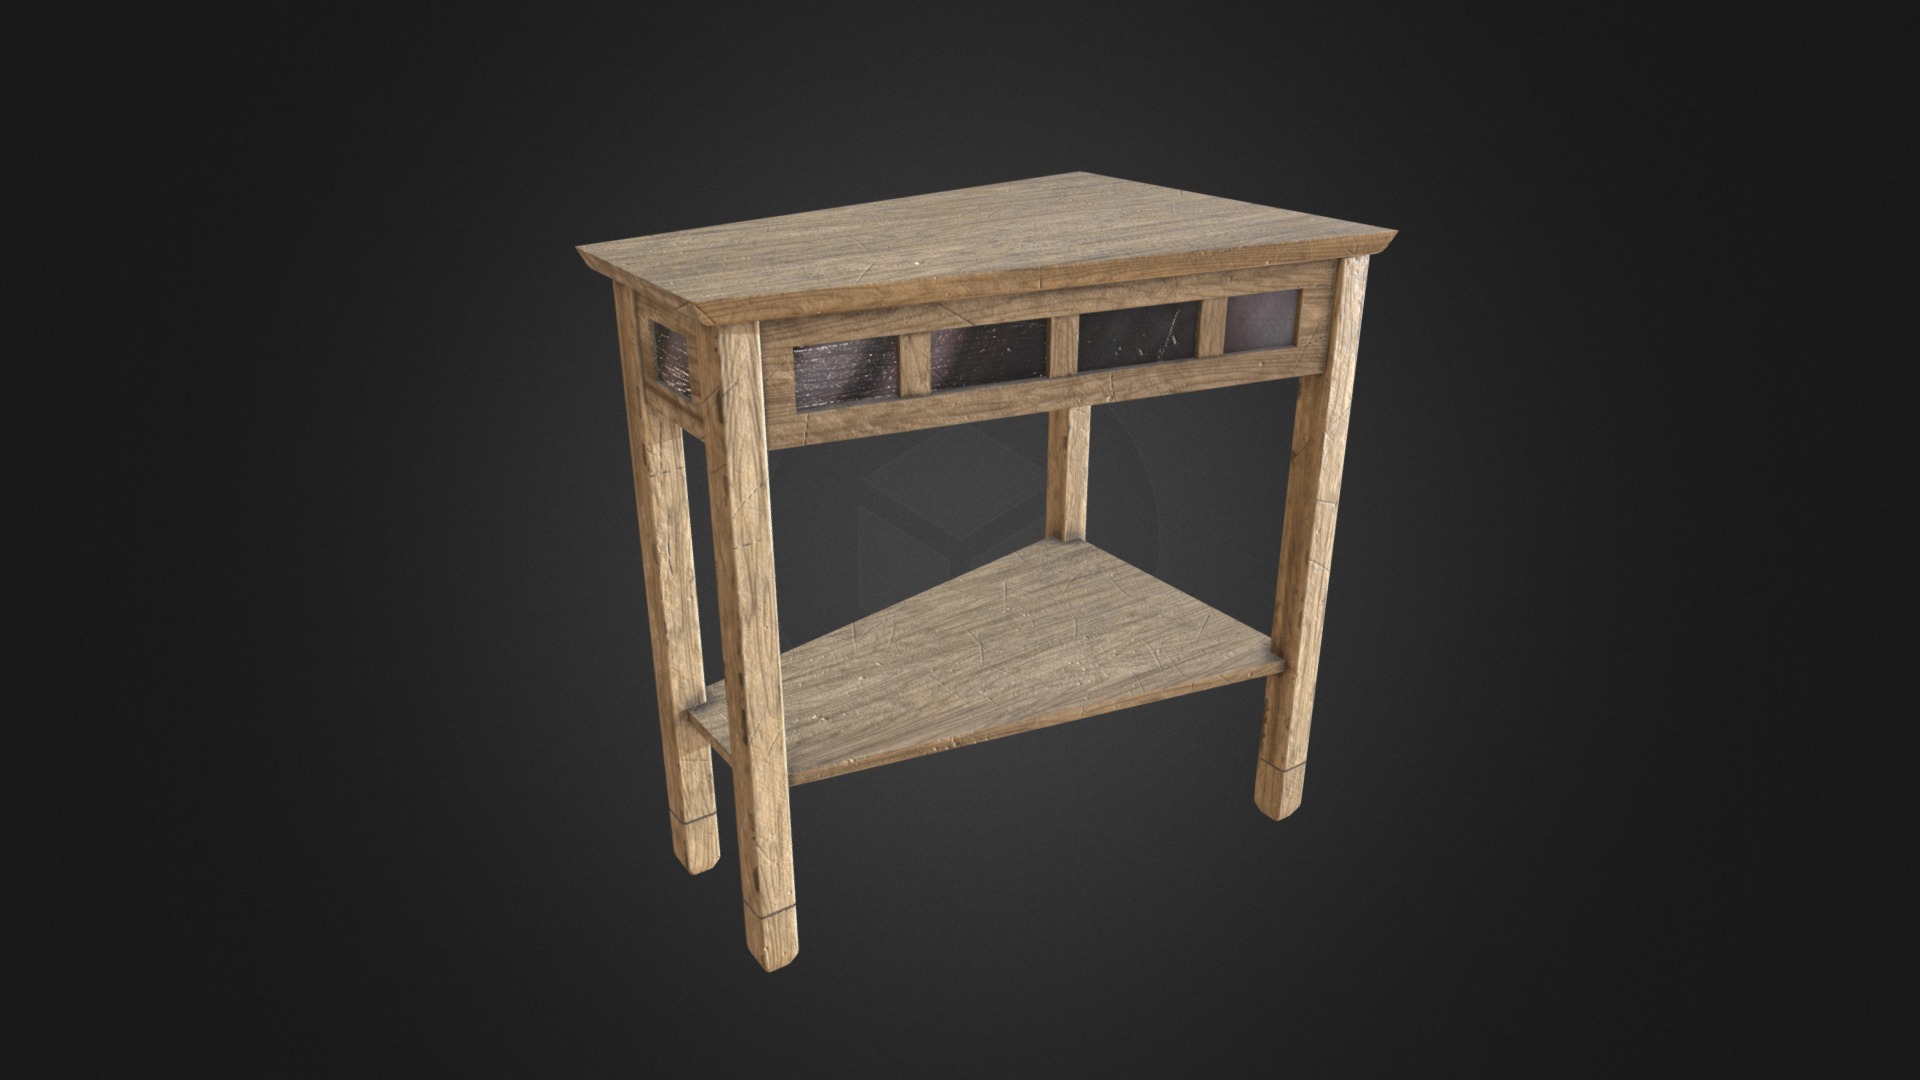 3D model PBR Wooden Table - This is a 3D model of the PBR Wooden Table. The 3D model is about a wooden box with a window.